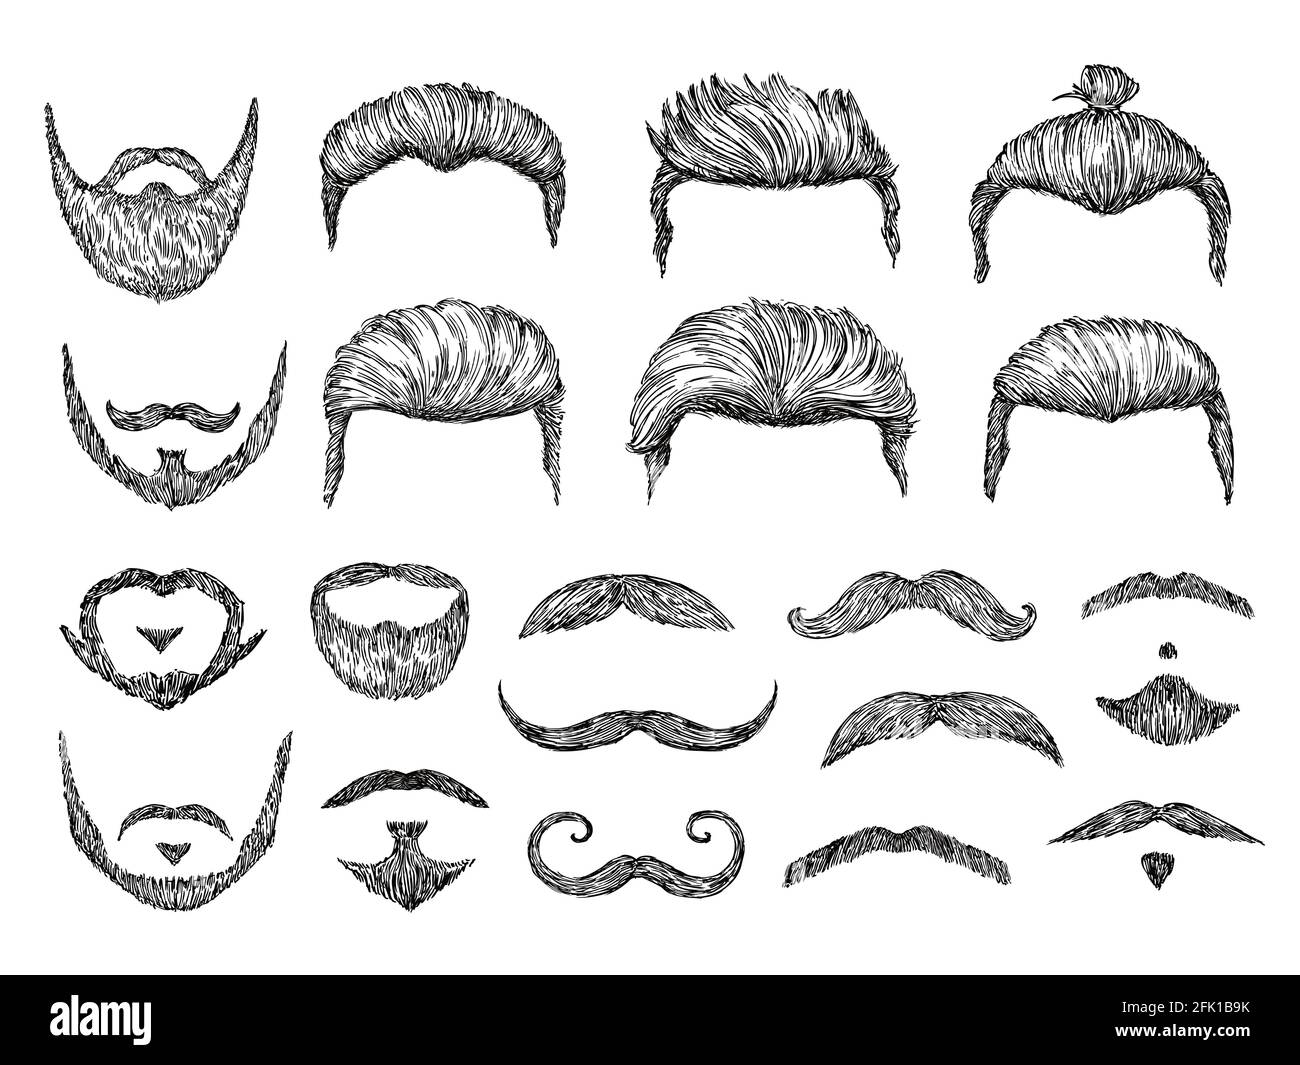 Male hairs sketch. Beard, mustache facial elements. Hand drawn hipster haircuts. Isolated fashion models barber shop hairstyles vector set Stock Vector